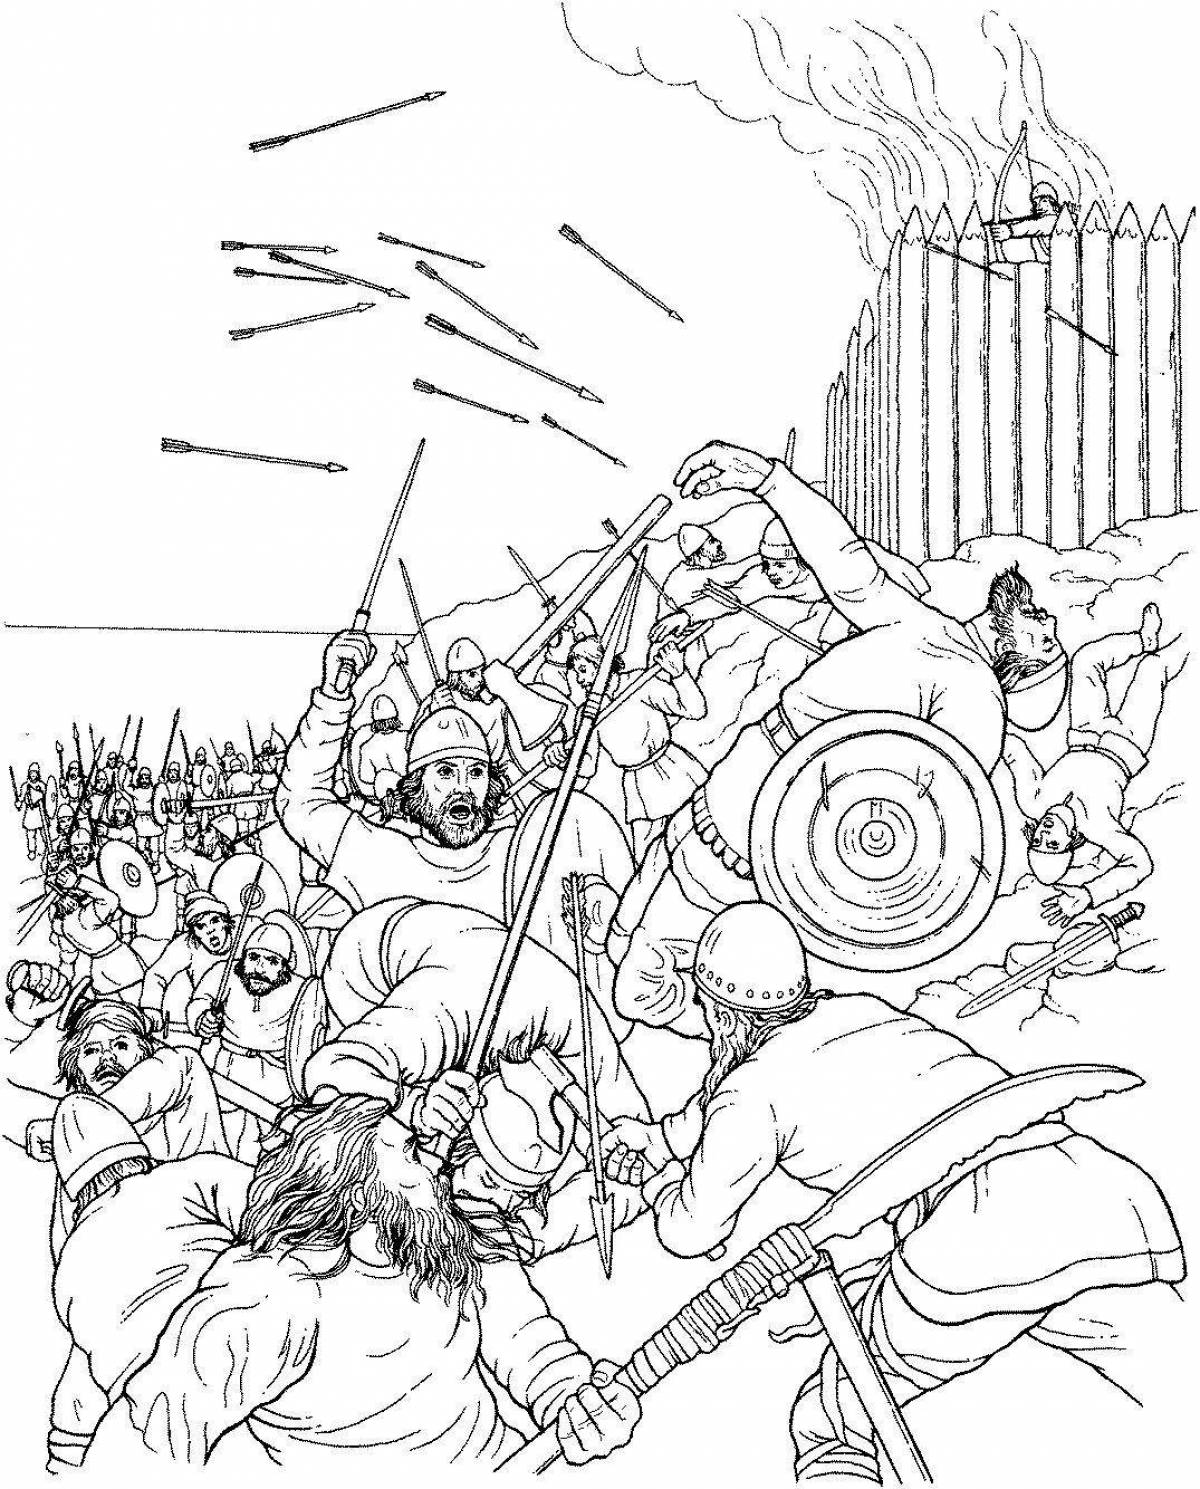 Battlefield inspiration coloring page